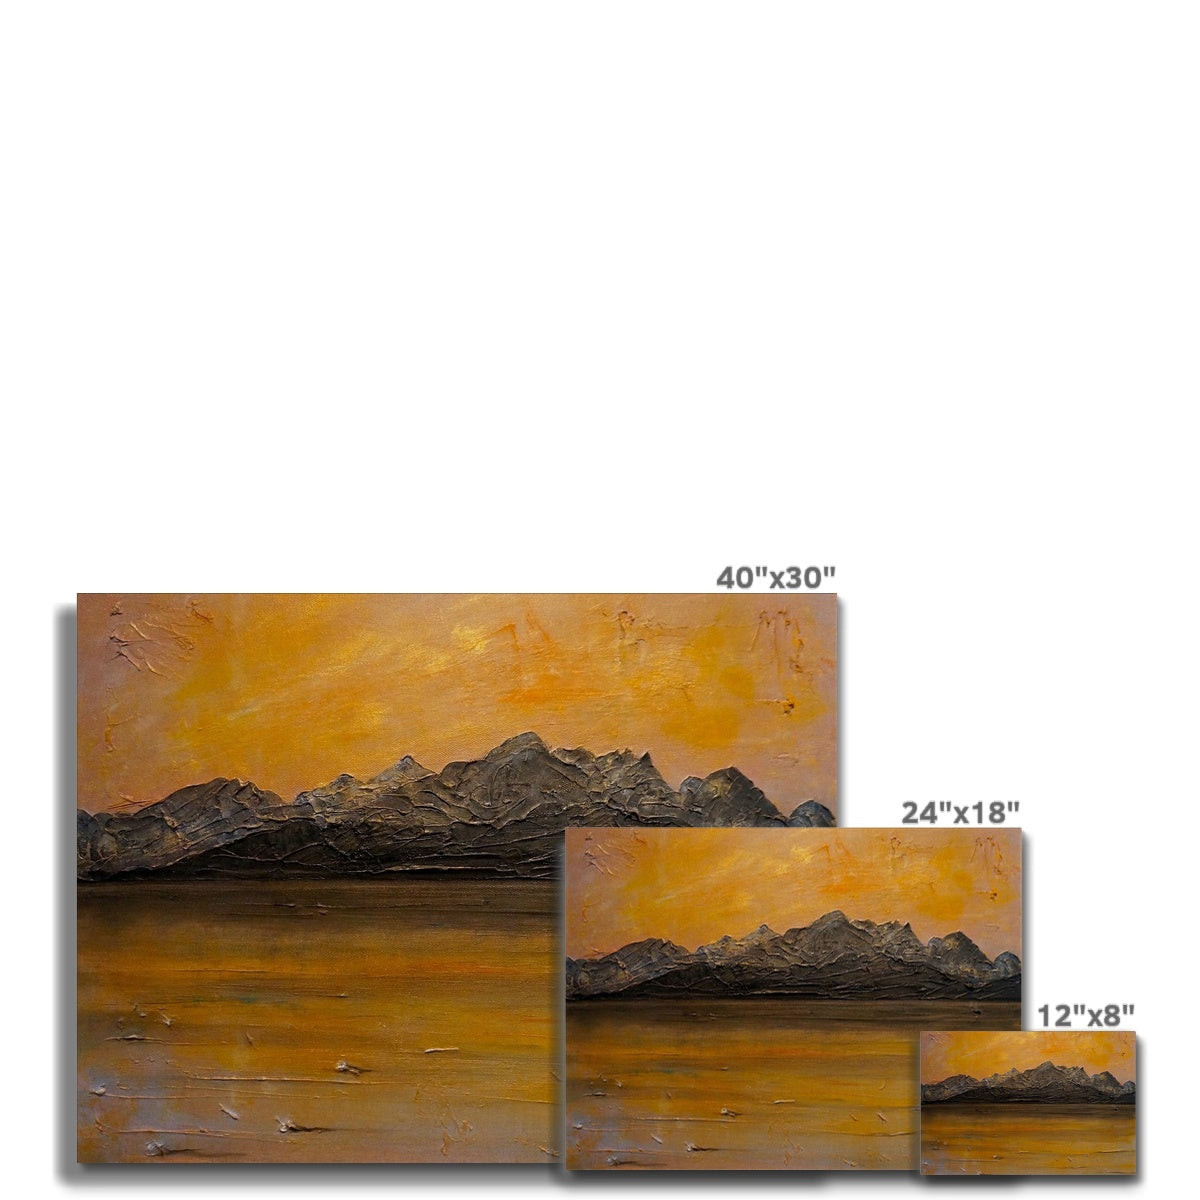 Cuillin Sunset Skye Painting | Canvas From Scotland-Contemporary Stretched Canvas Prints-Skye Art Gallery-Paintings, Prints, Homeware, Art Gifts From Scotland By Scottish Artist Kevin Hunter